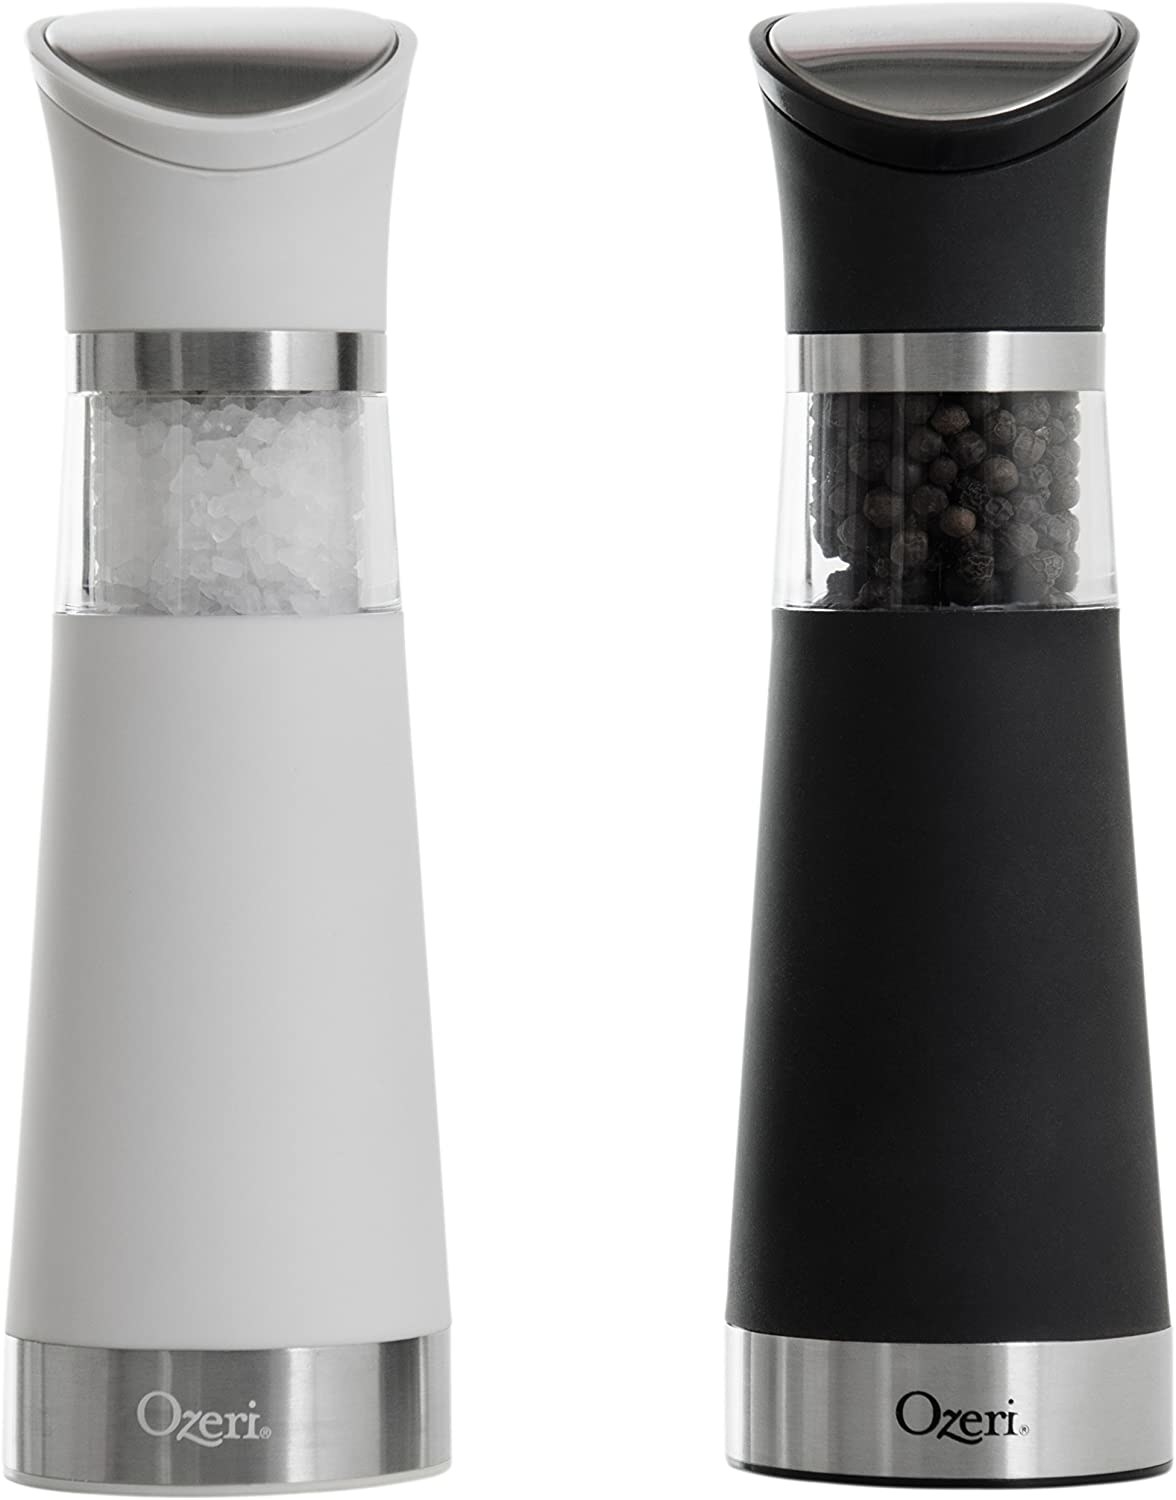 The electric salt and pepper shakers